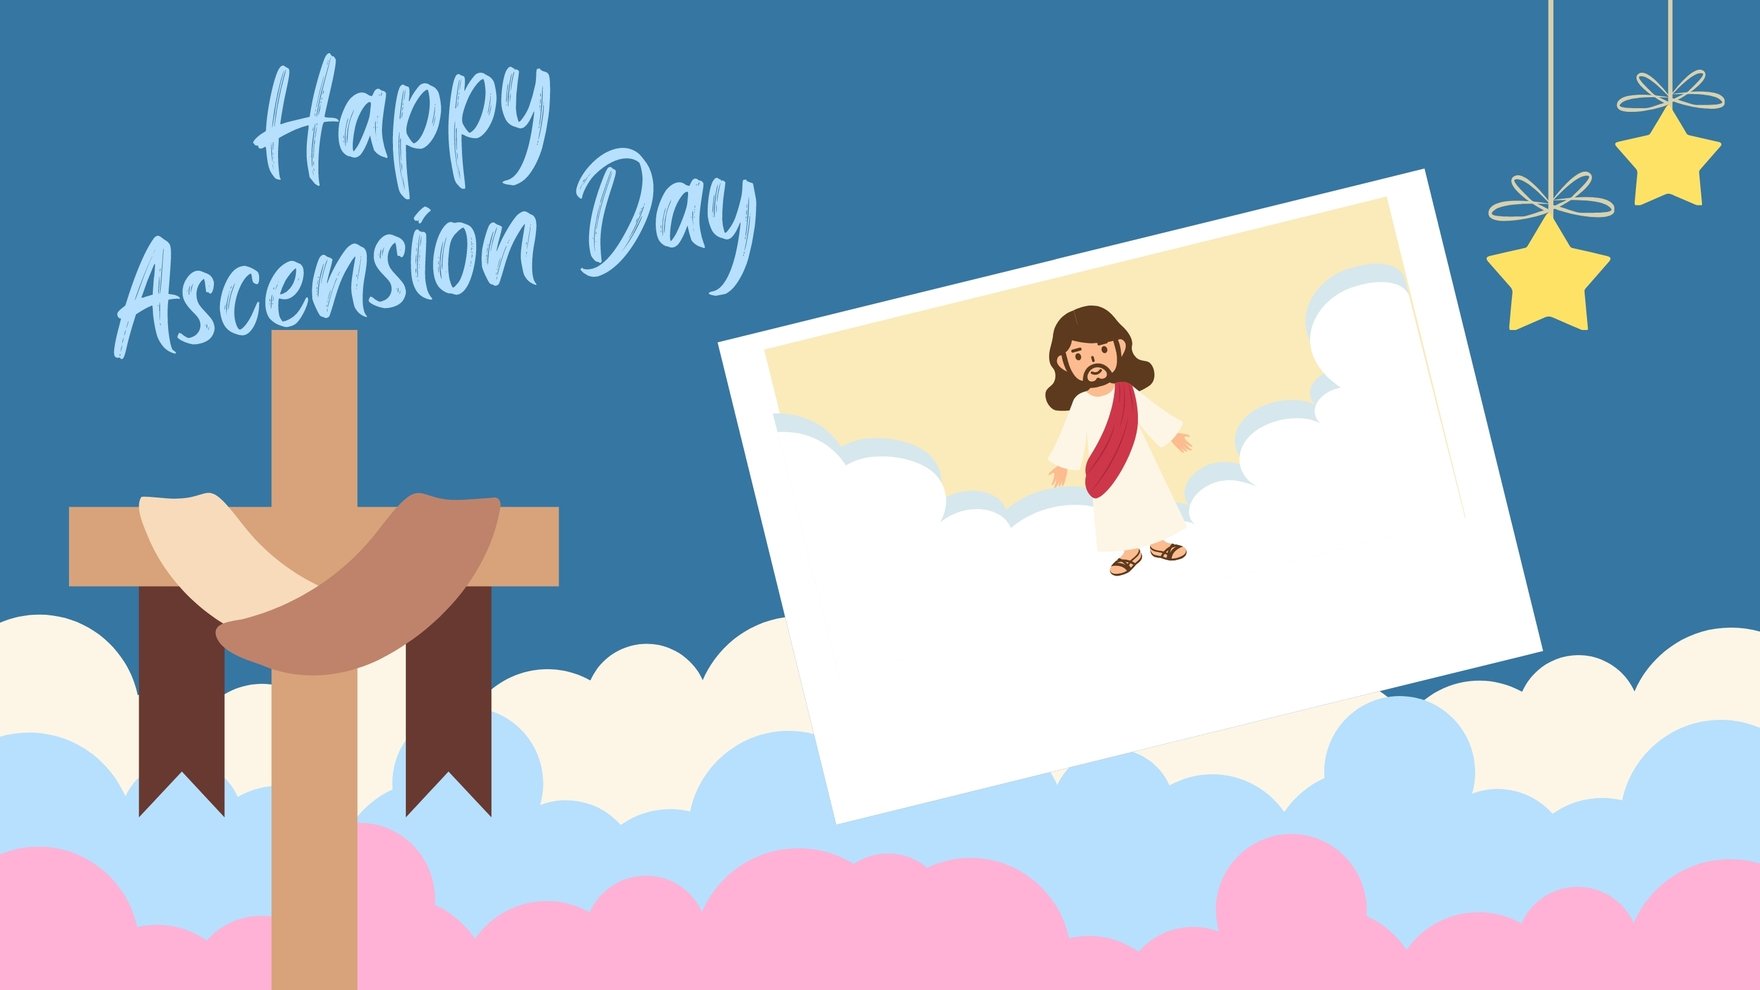 Free Ascension Day Photo Background